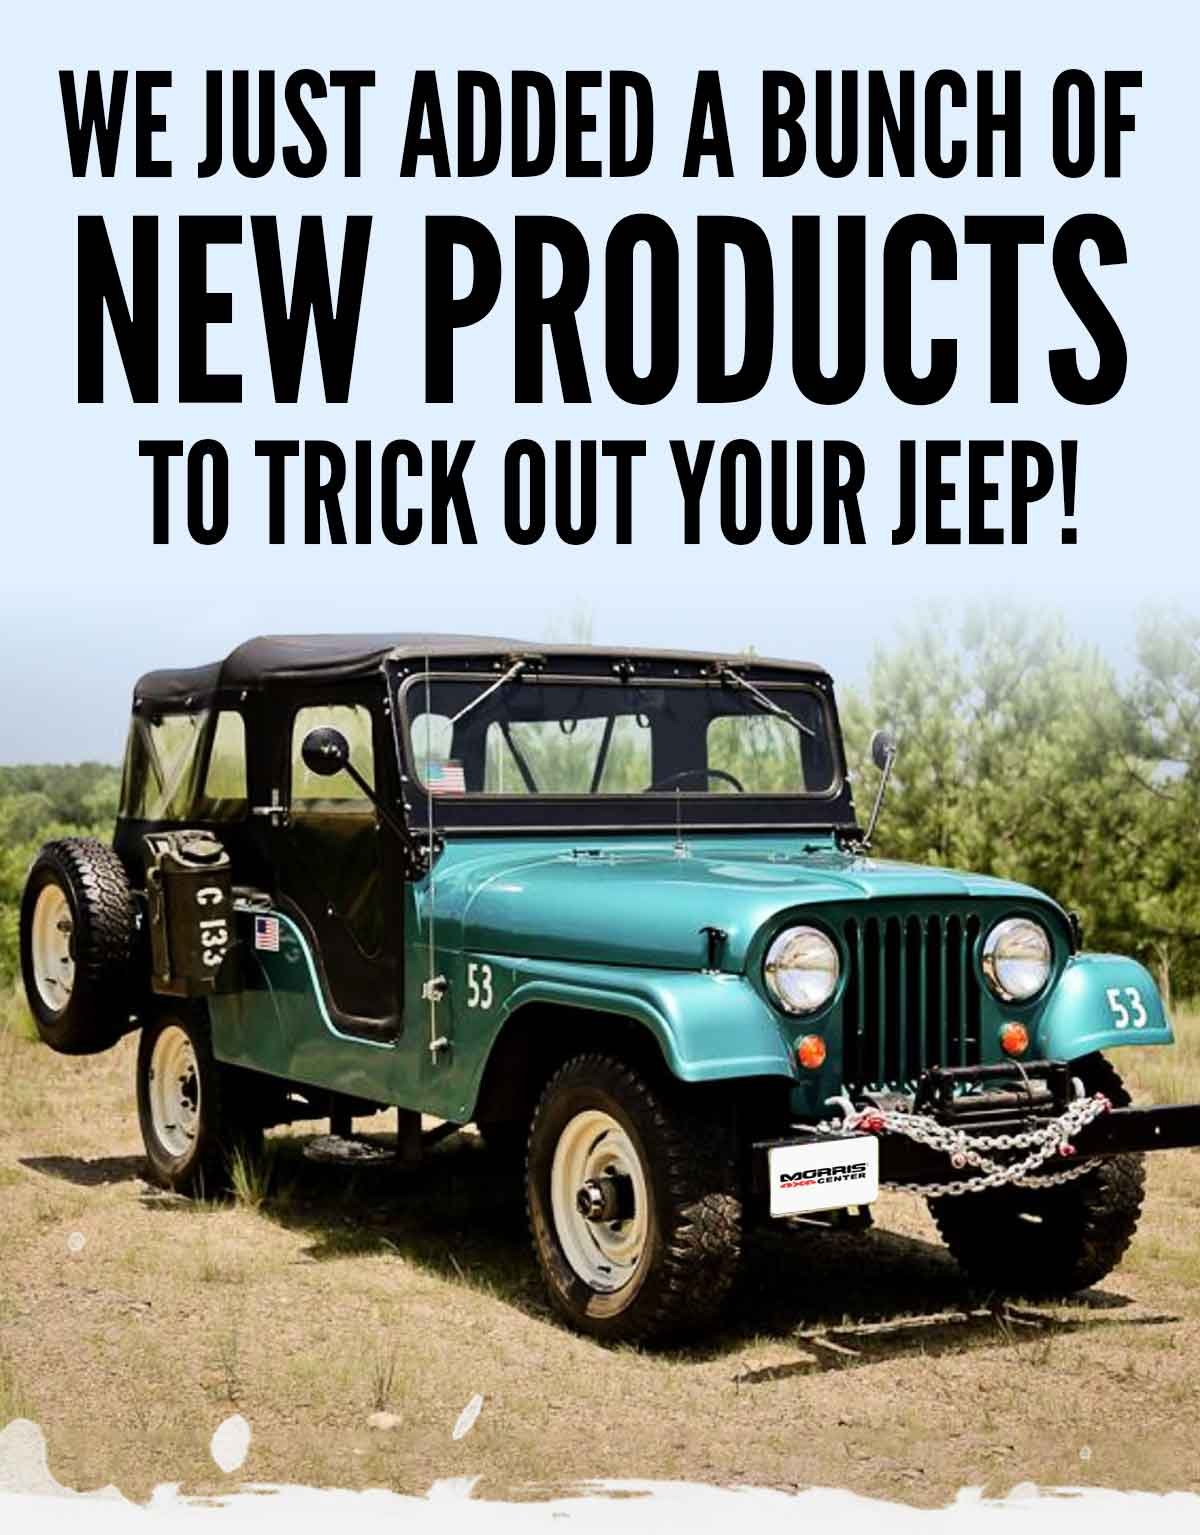 We Just Added A Bunch Of New Products To Trick Out Your Jeep!